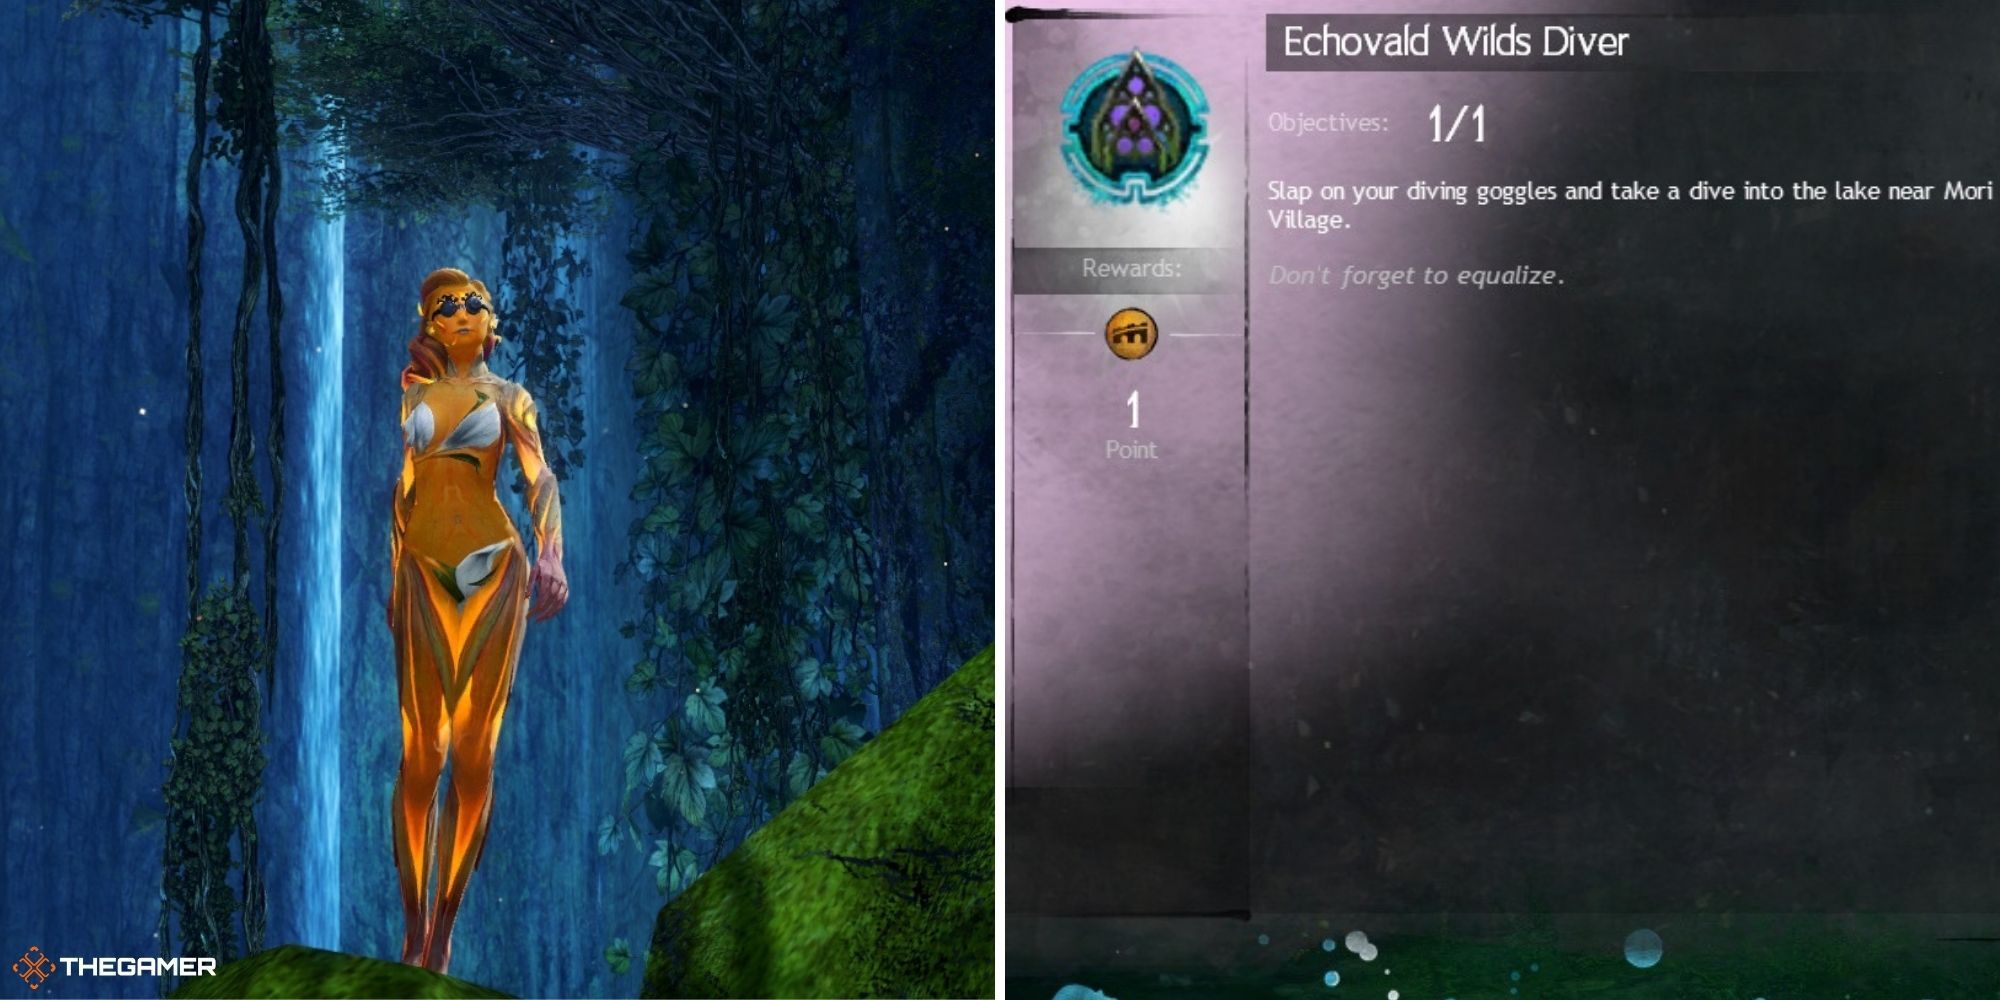 Guild Wars 2 end of dragons - earning the echovald wilds diver achievement (1)